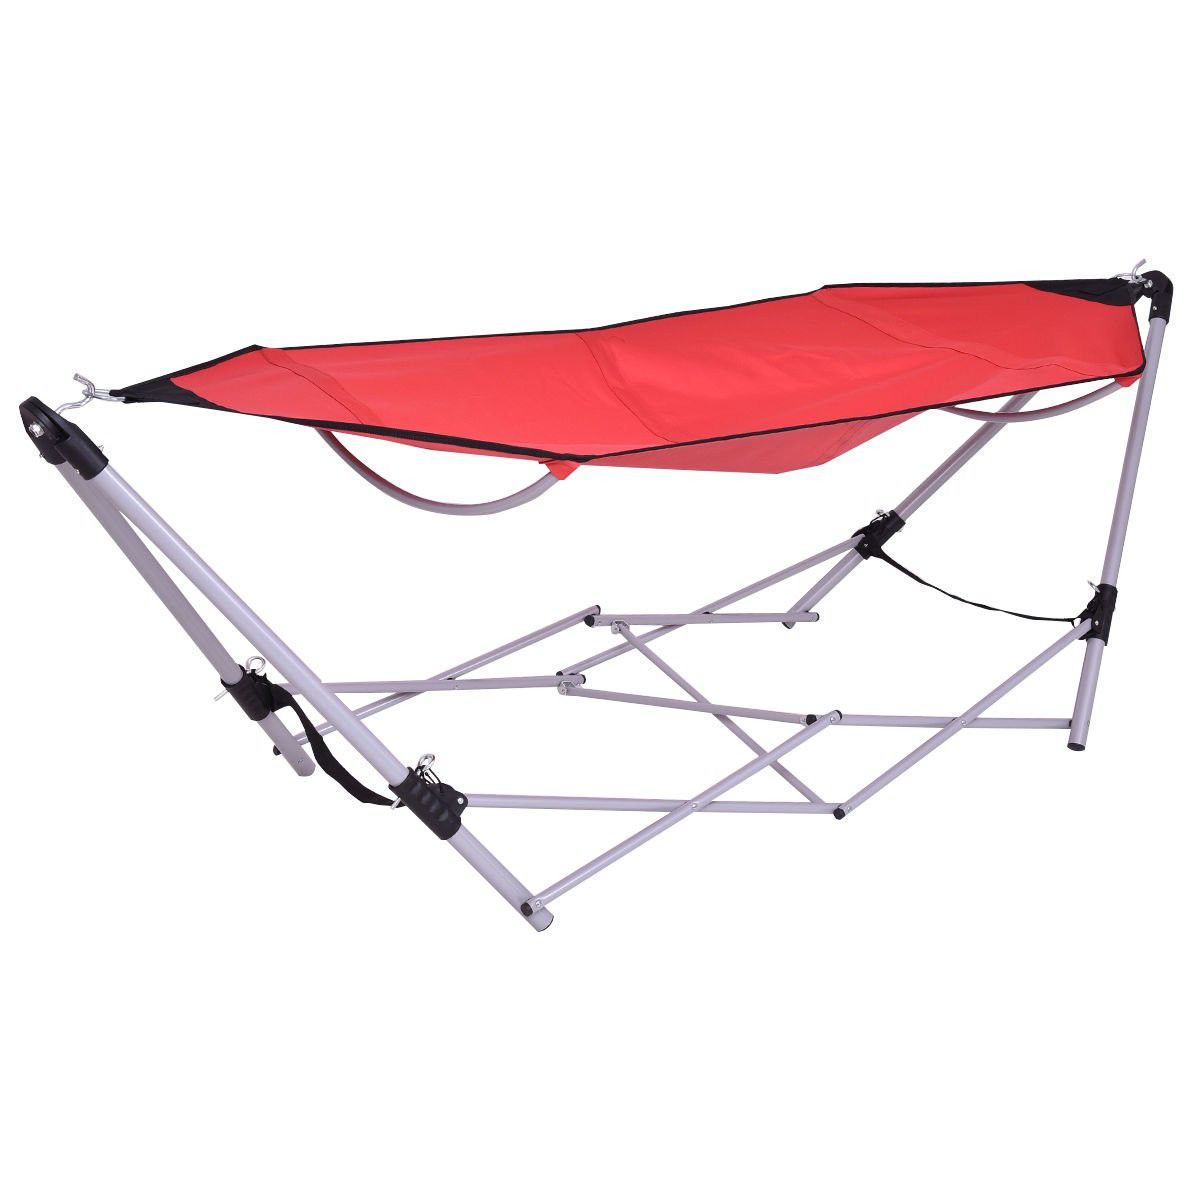 Red Portable Folding Hammock Lounge Camping Bed Steel Frame Stand W/Carry Bag